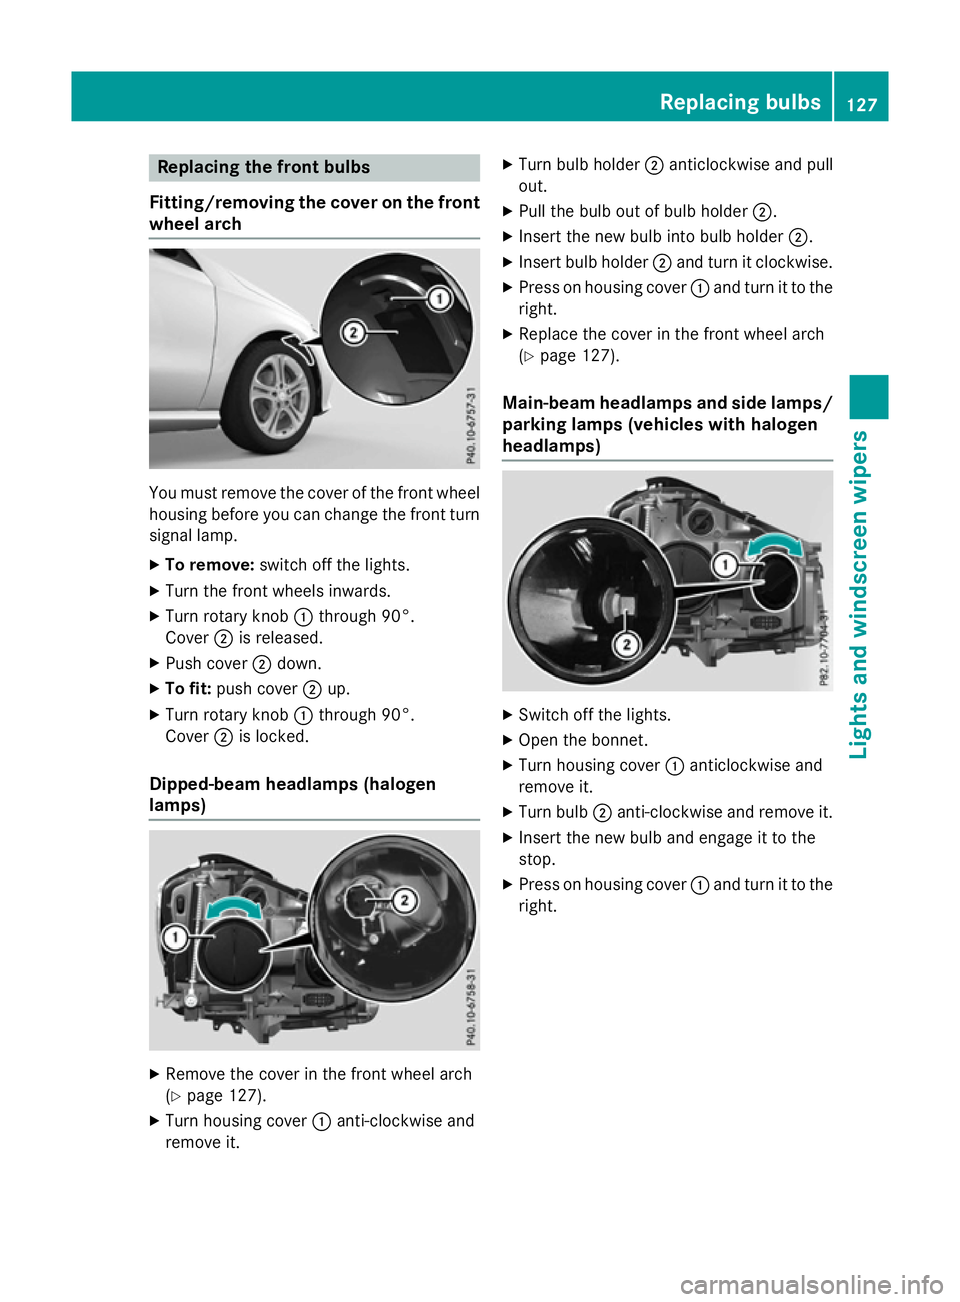 MERCEDES-BENZ A-CLASS HATCHBACK 2015  Owners Manual Replacing the front bulbs
Fitting/removing the cover on the front wheel arch You must remove the cover of the front wheel
housing before you can change the front turn signal lamp.
X To remove: switch 